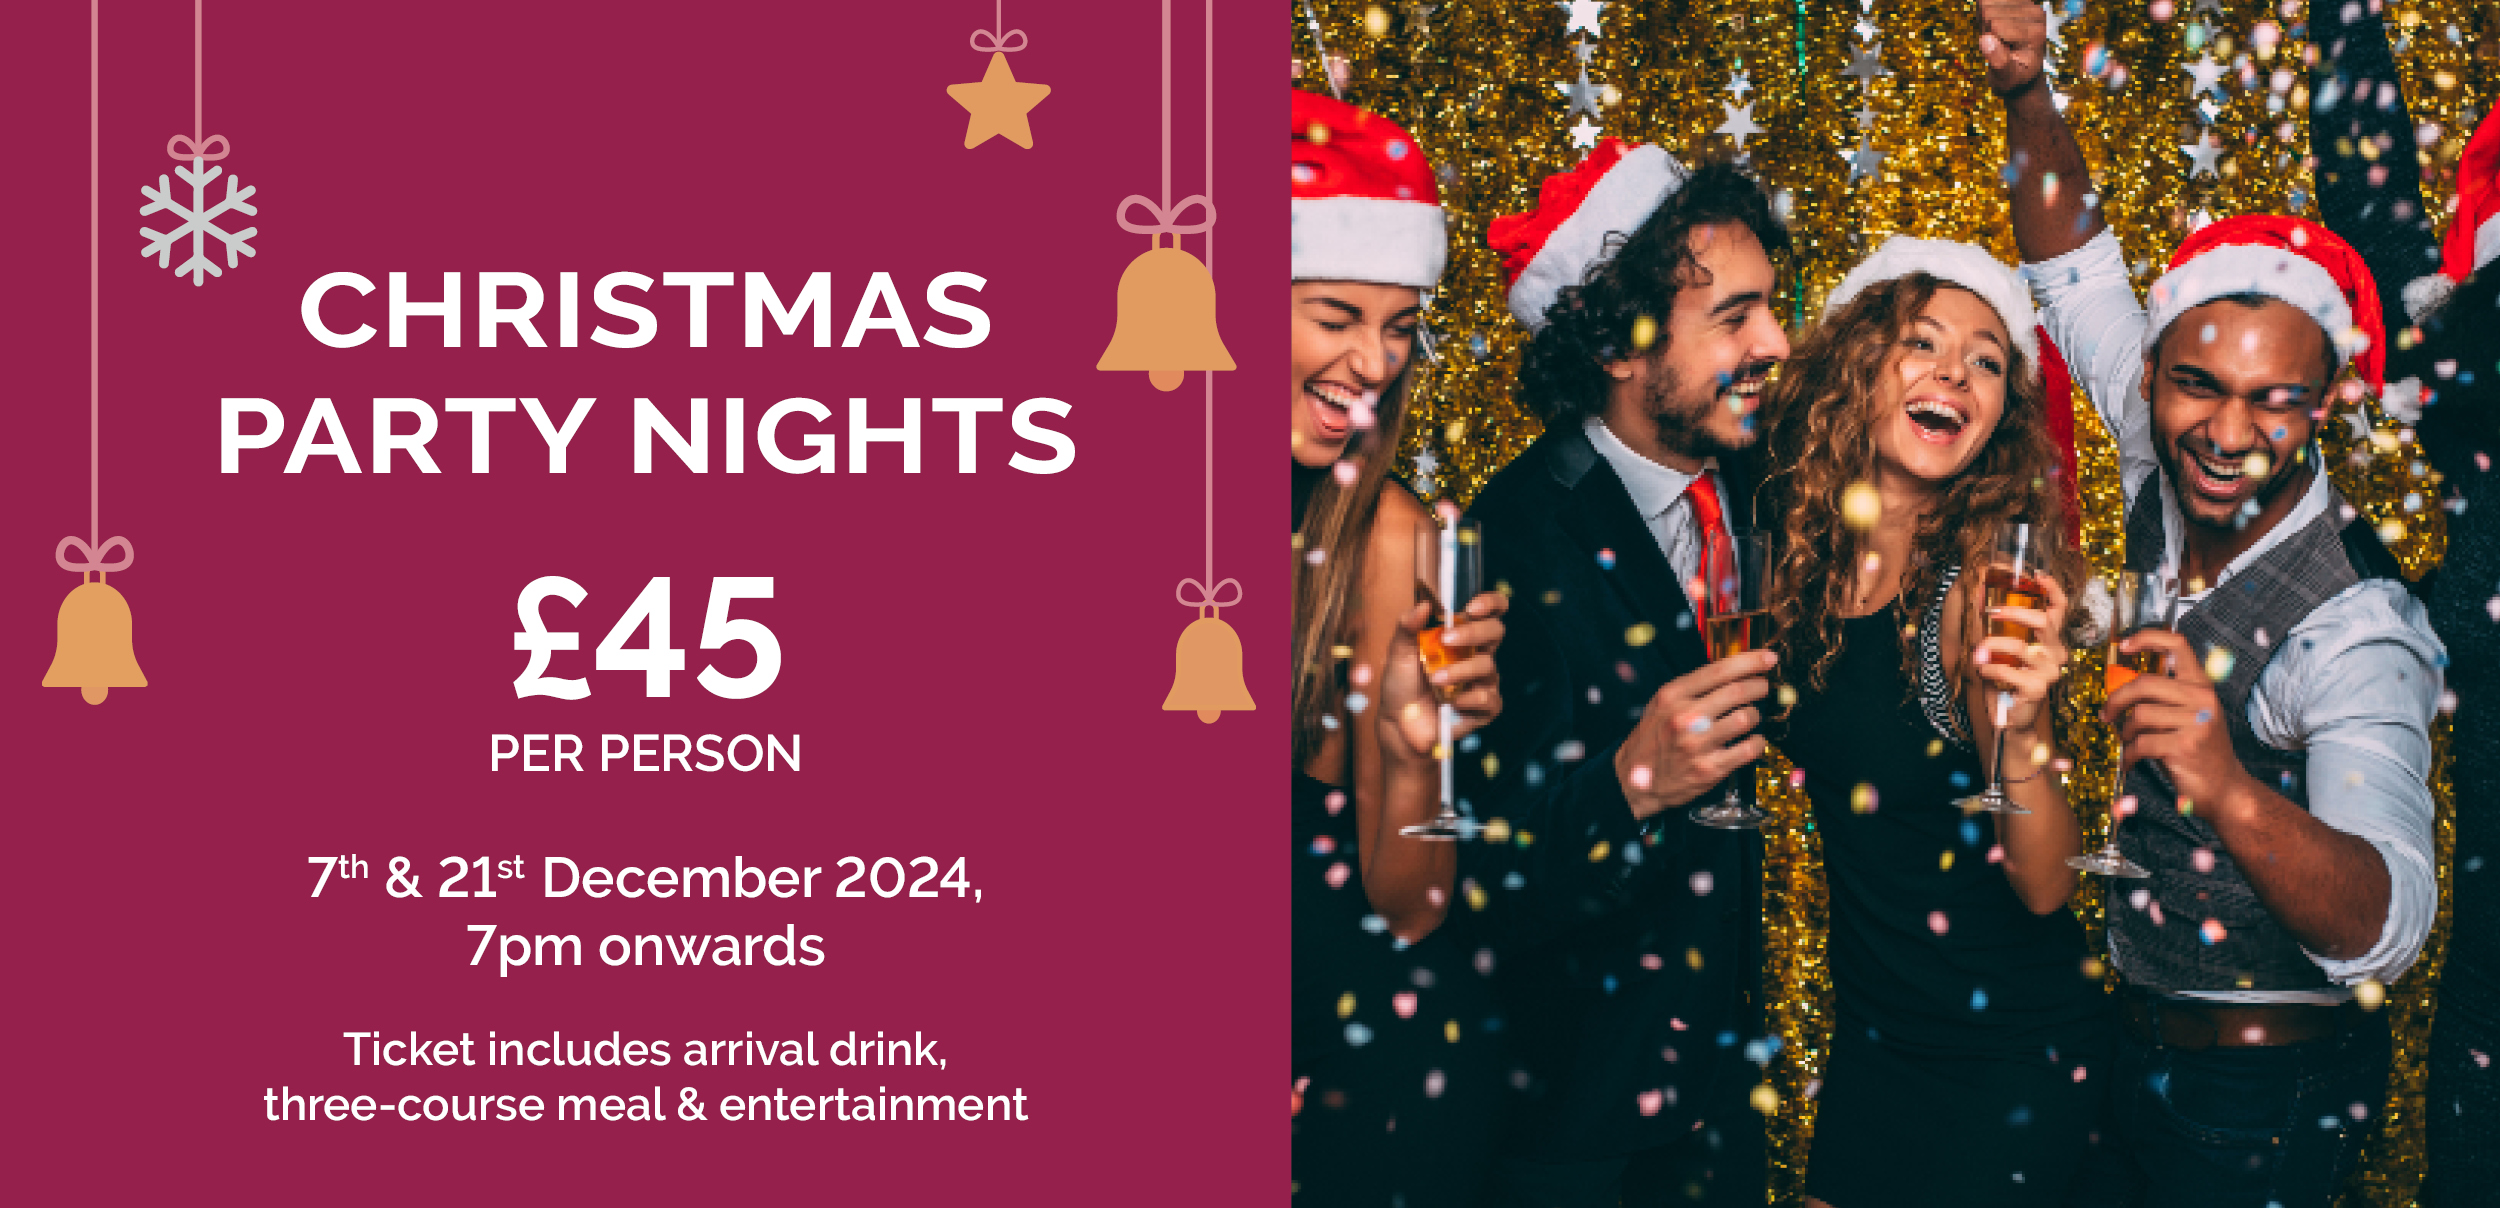 Christmas Party Nights 7th & 21st December 2024 7pm onwards £45 per ticket